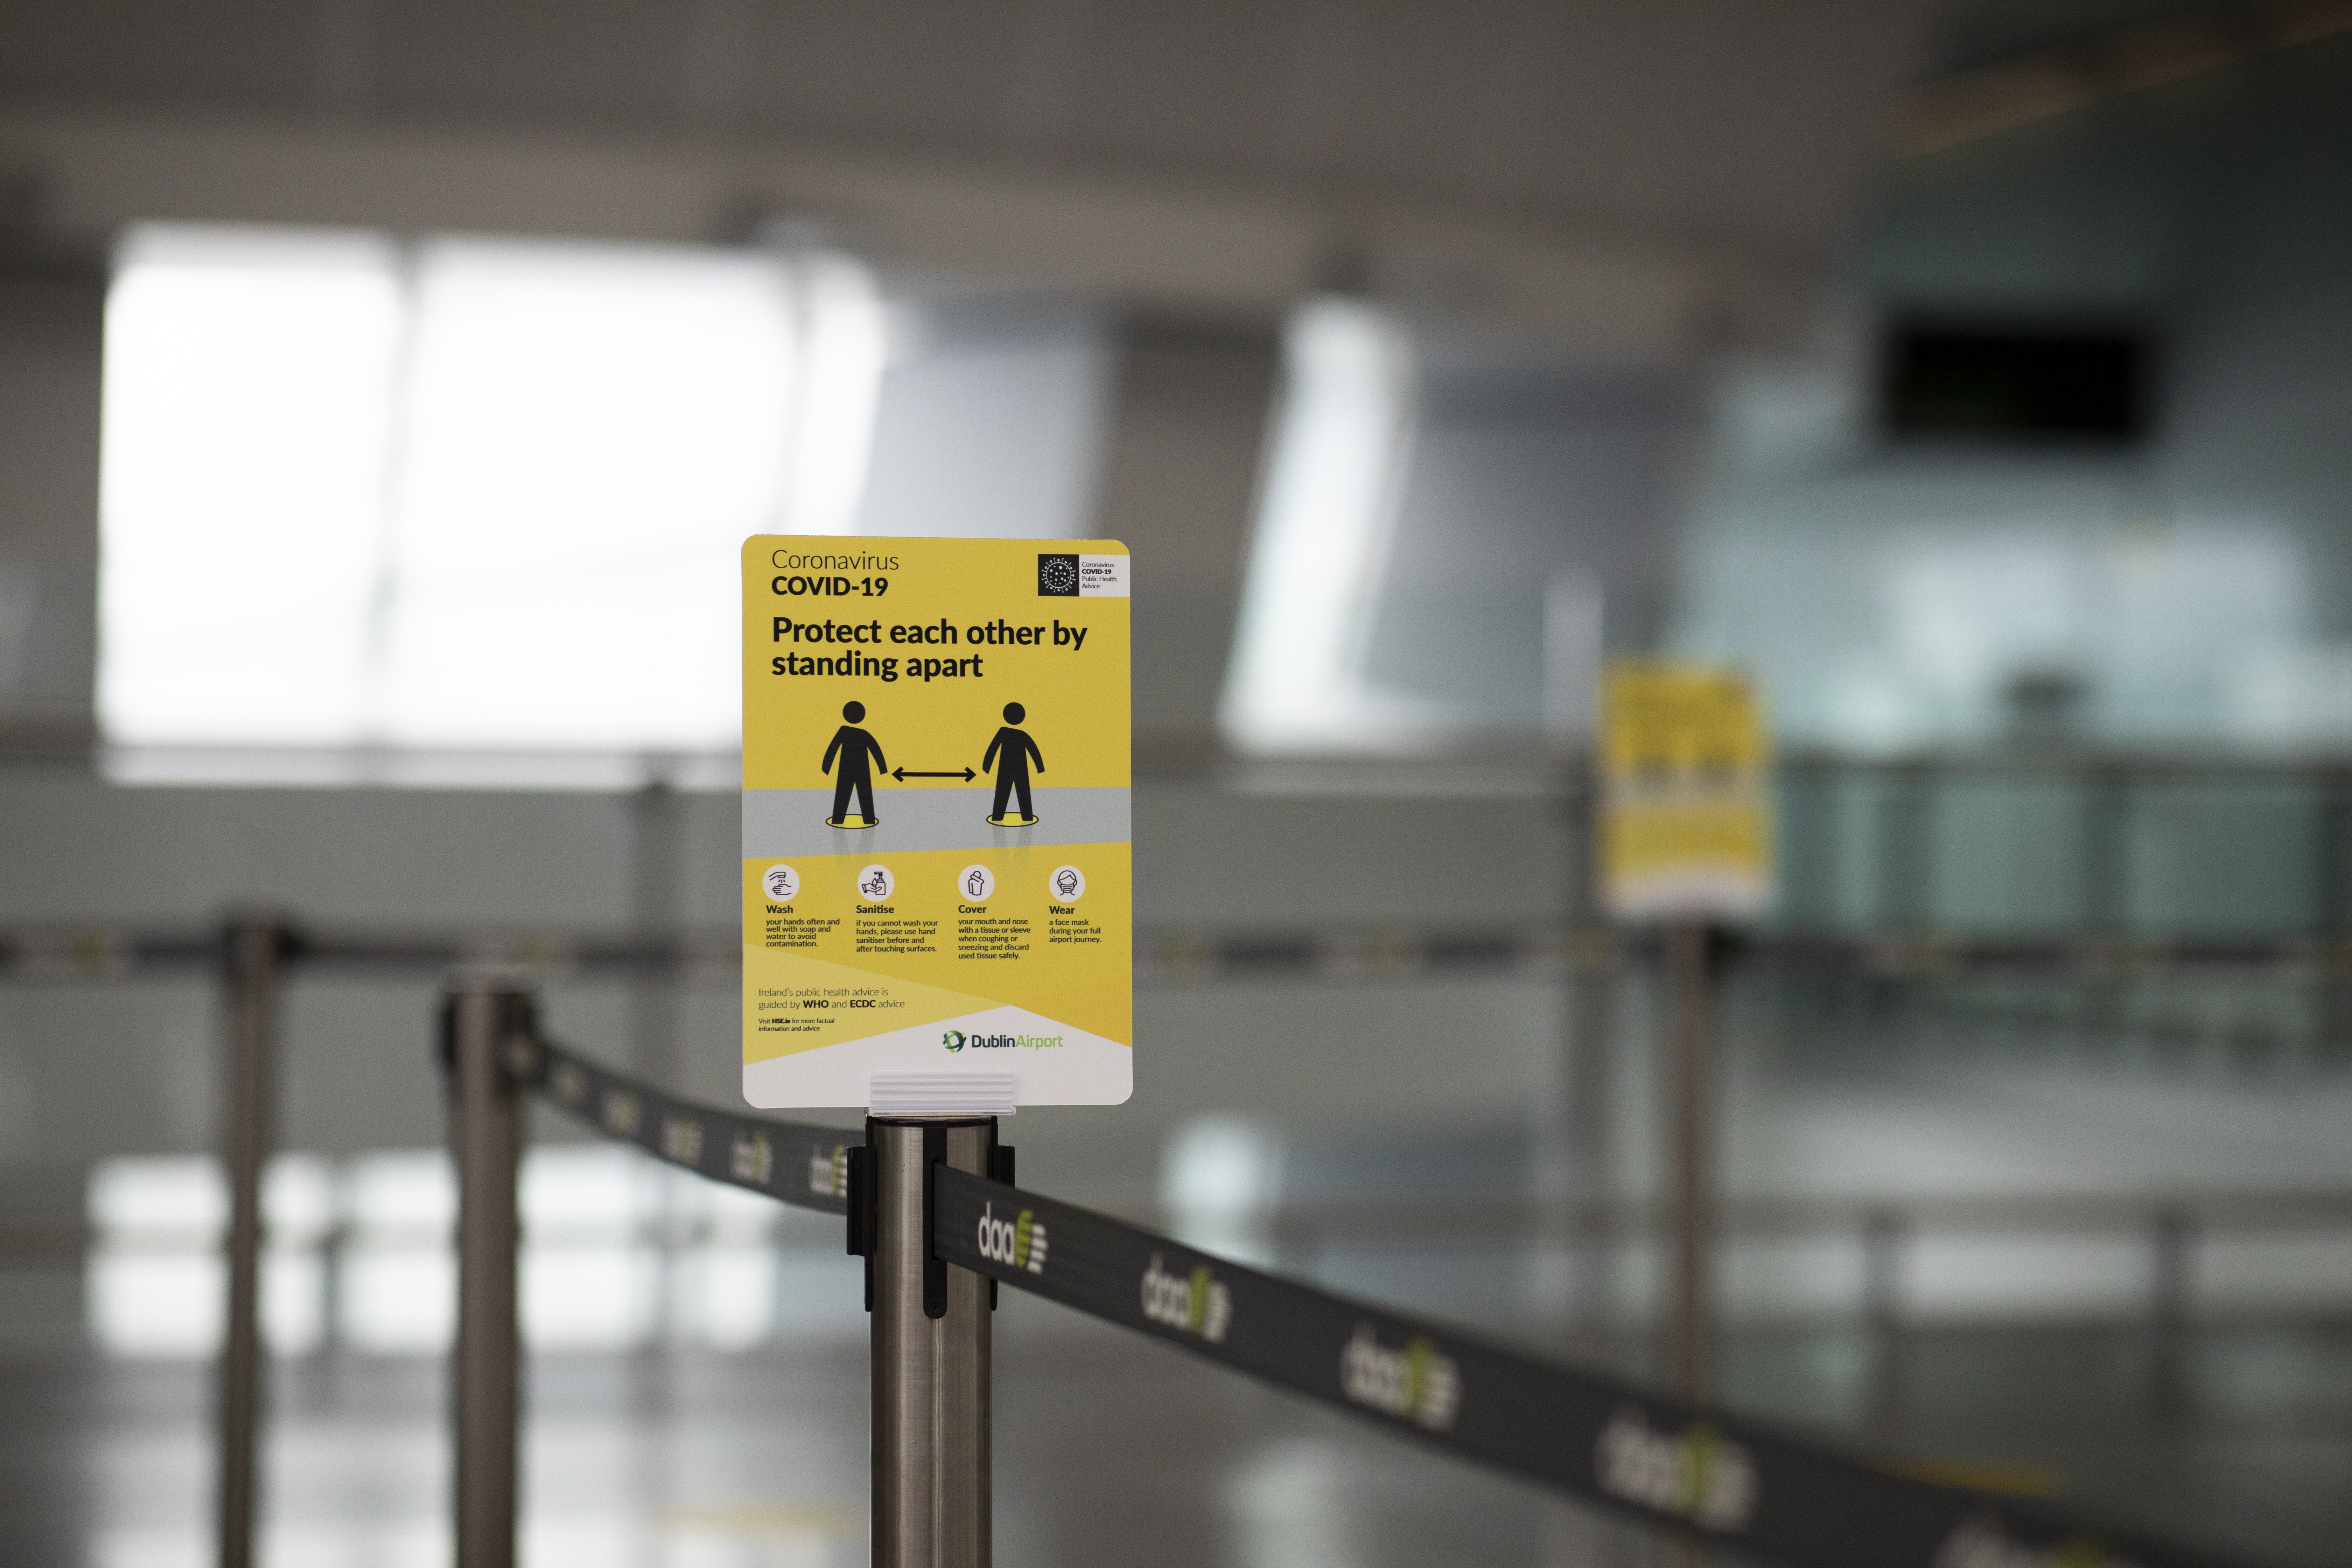 Social distancing signage in Q lane at Dublin Airport.